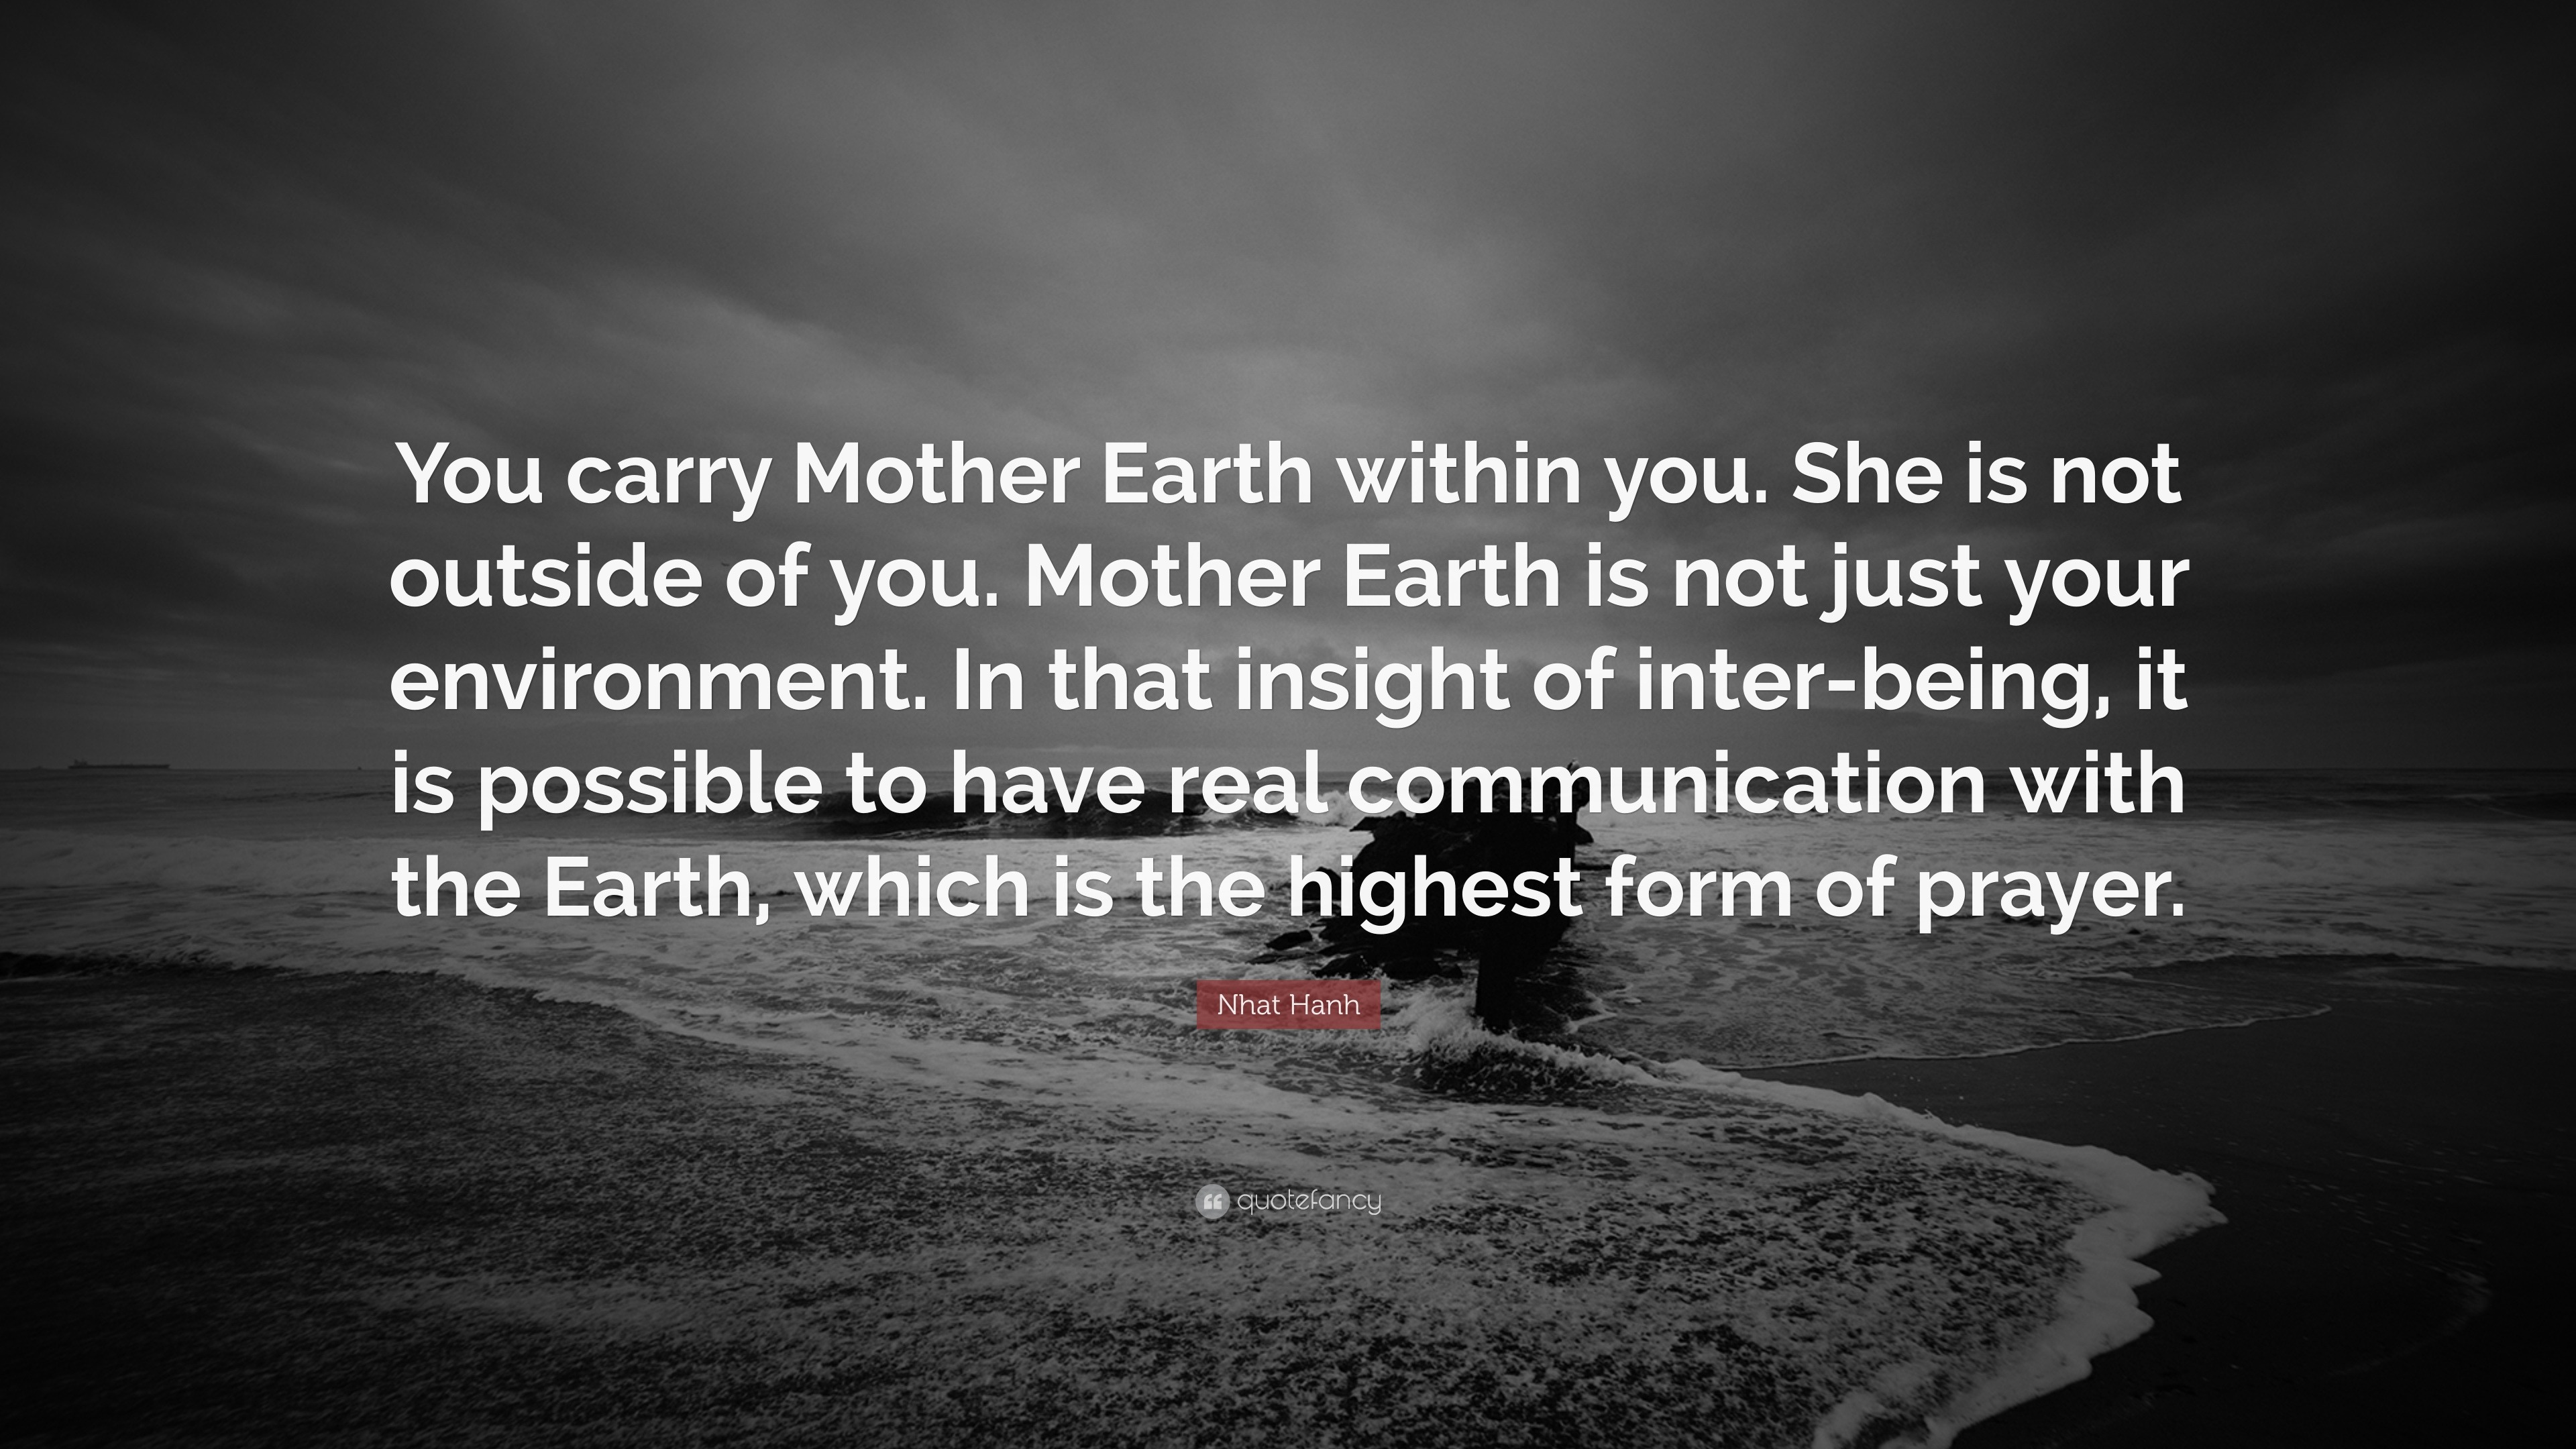 Nhat Hanh Quote “You carry Mother Earth within you She is not outside